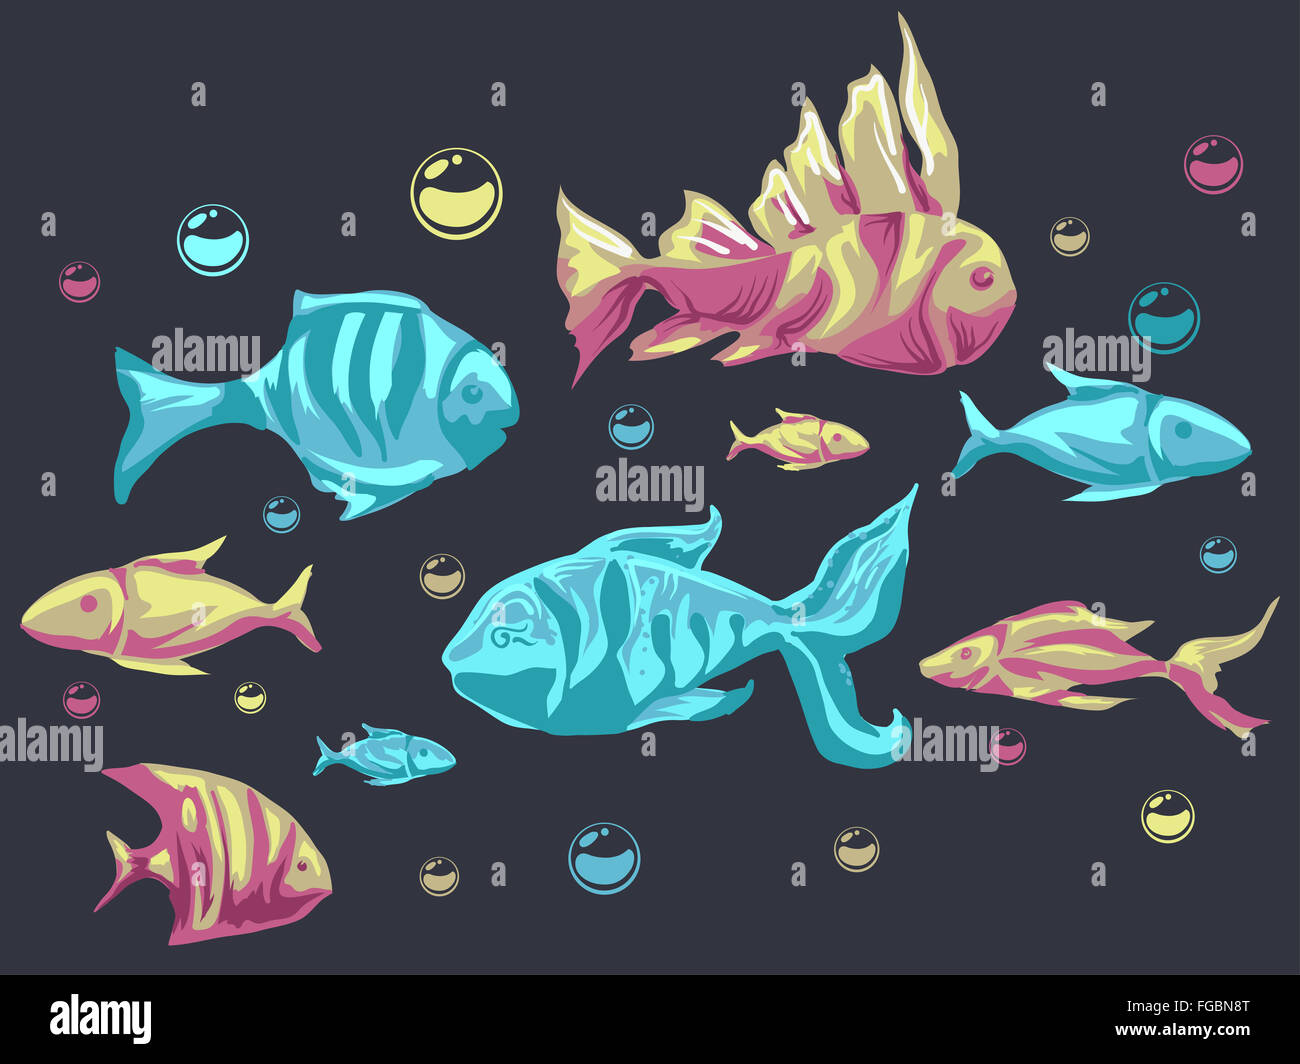 Colorful Illustration Featuring Different Types of Fishes Stock Photo